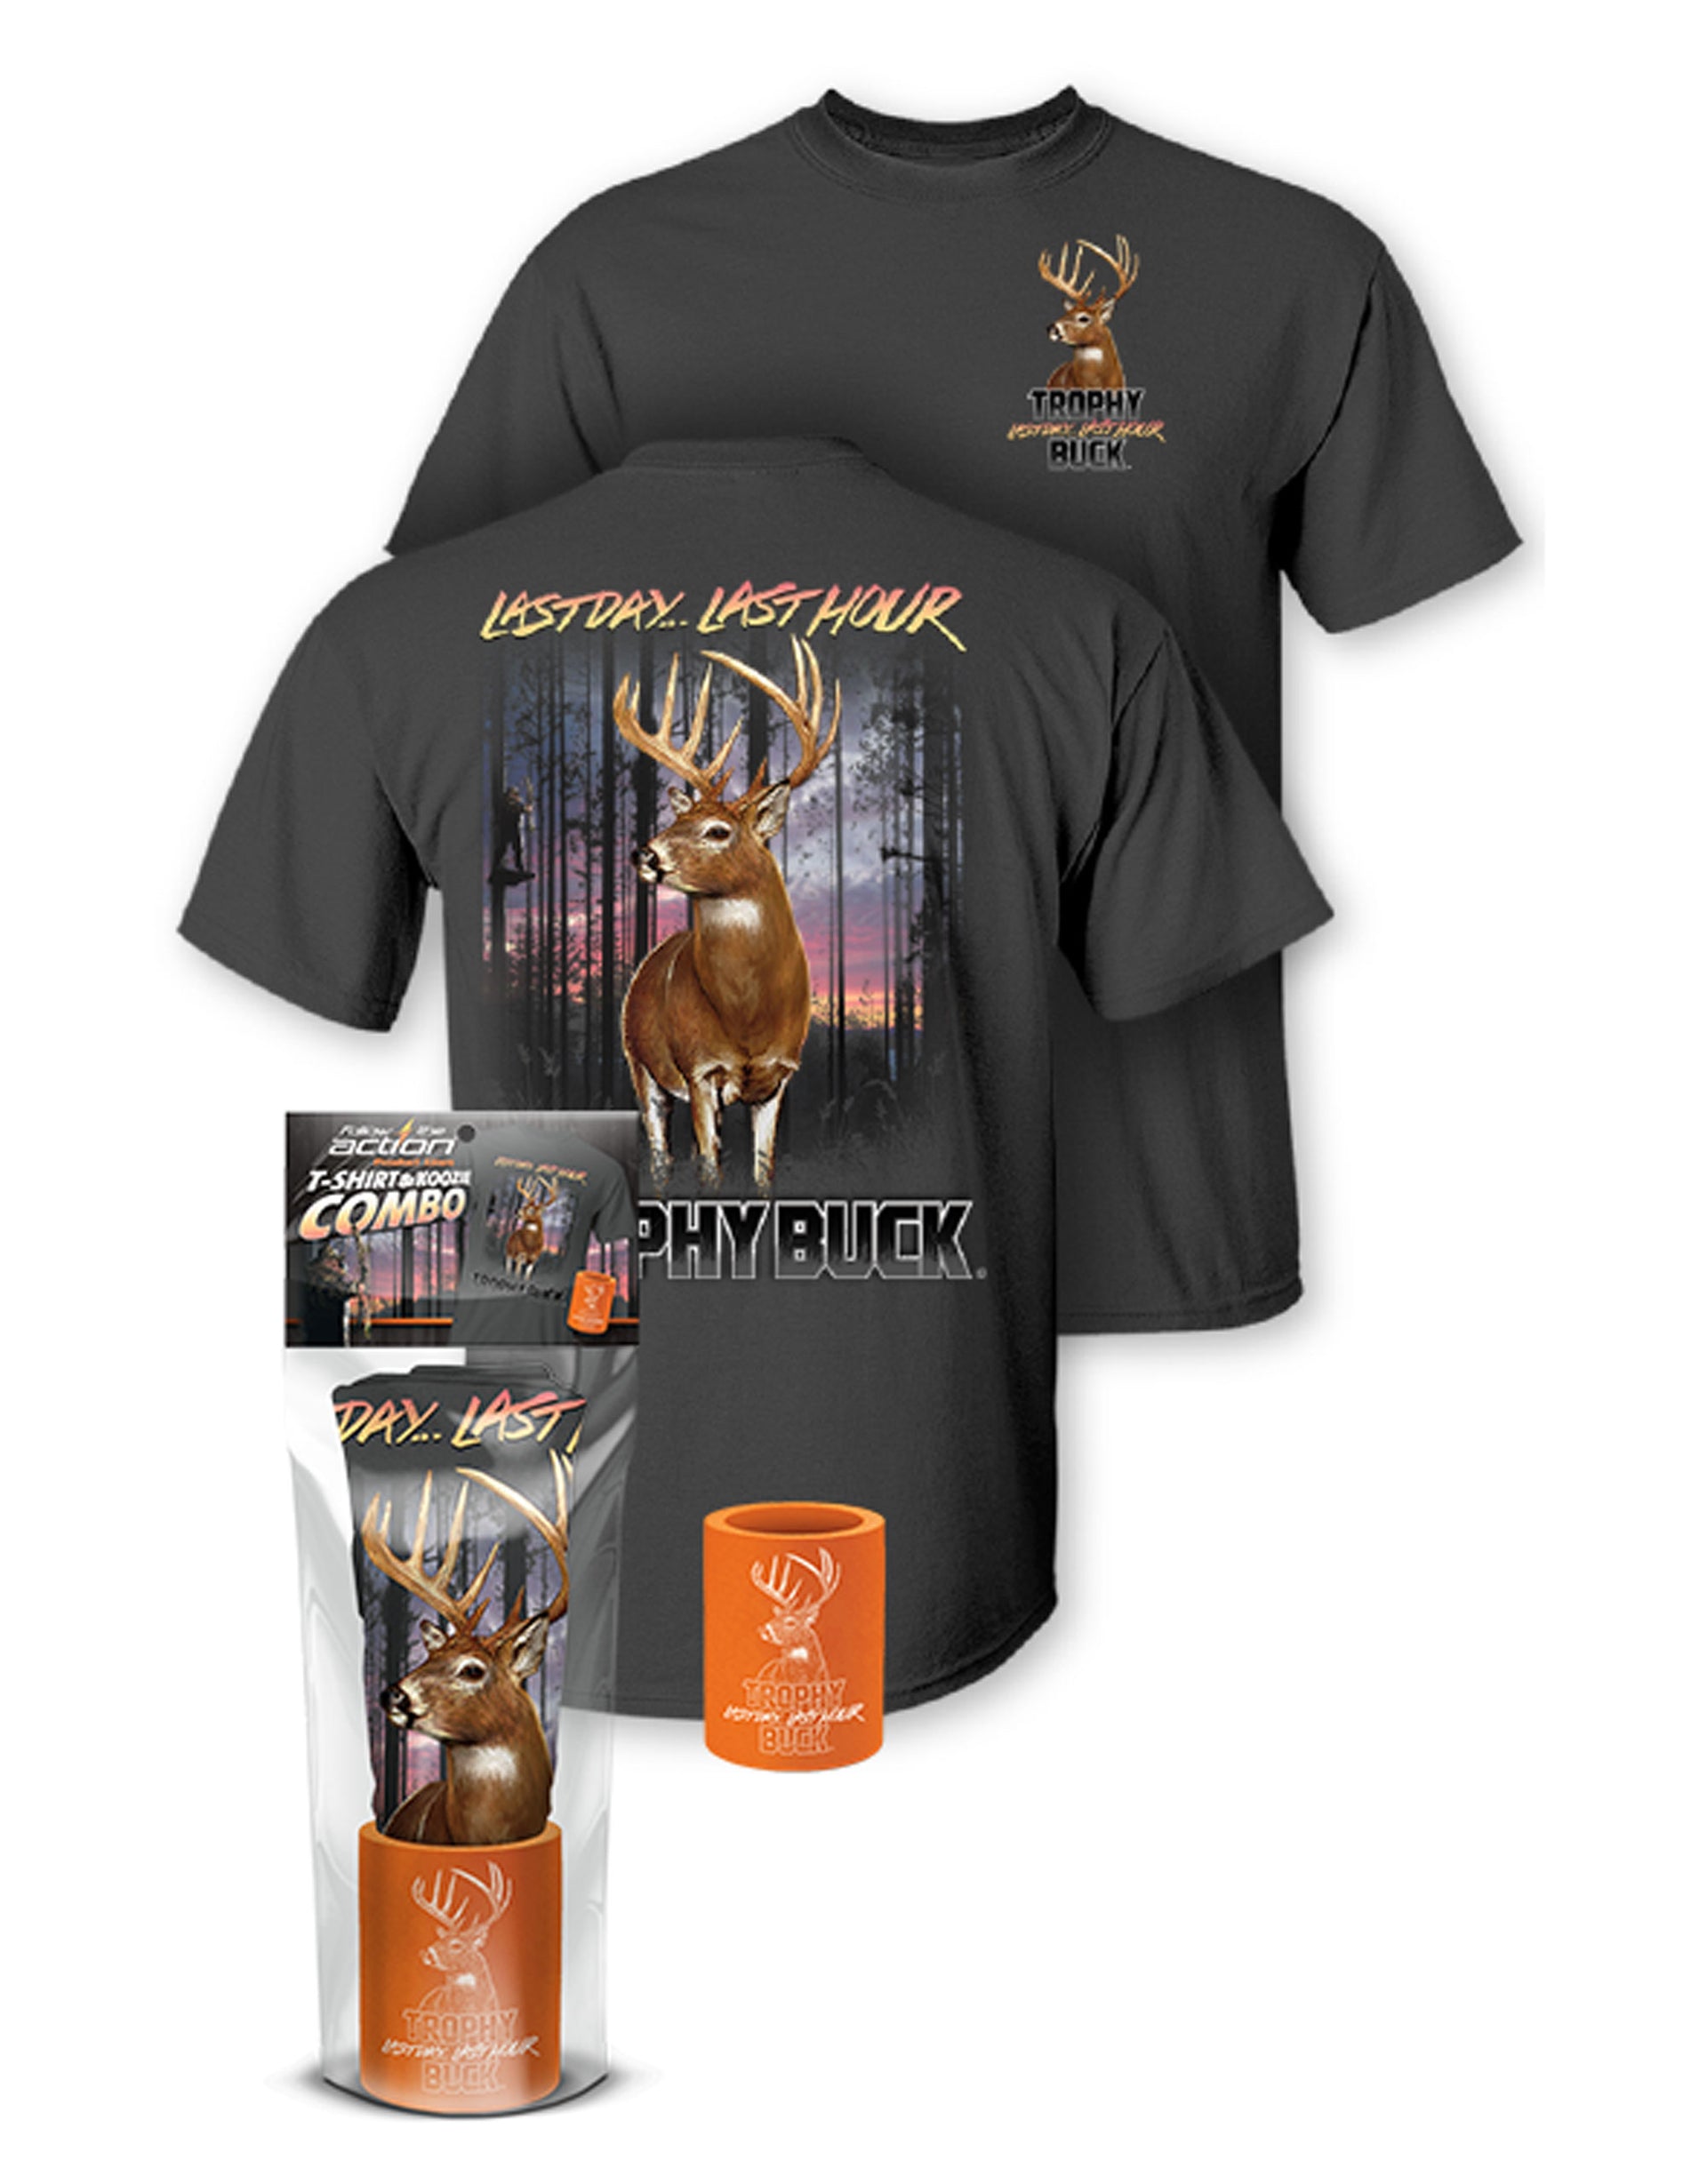 T-Shirt Action Whitetail and Lines Follow The – Deer Set Combos Gift Can Product Cooler Buck\